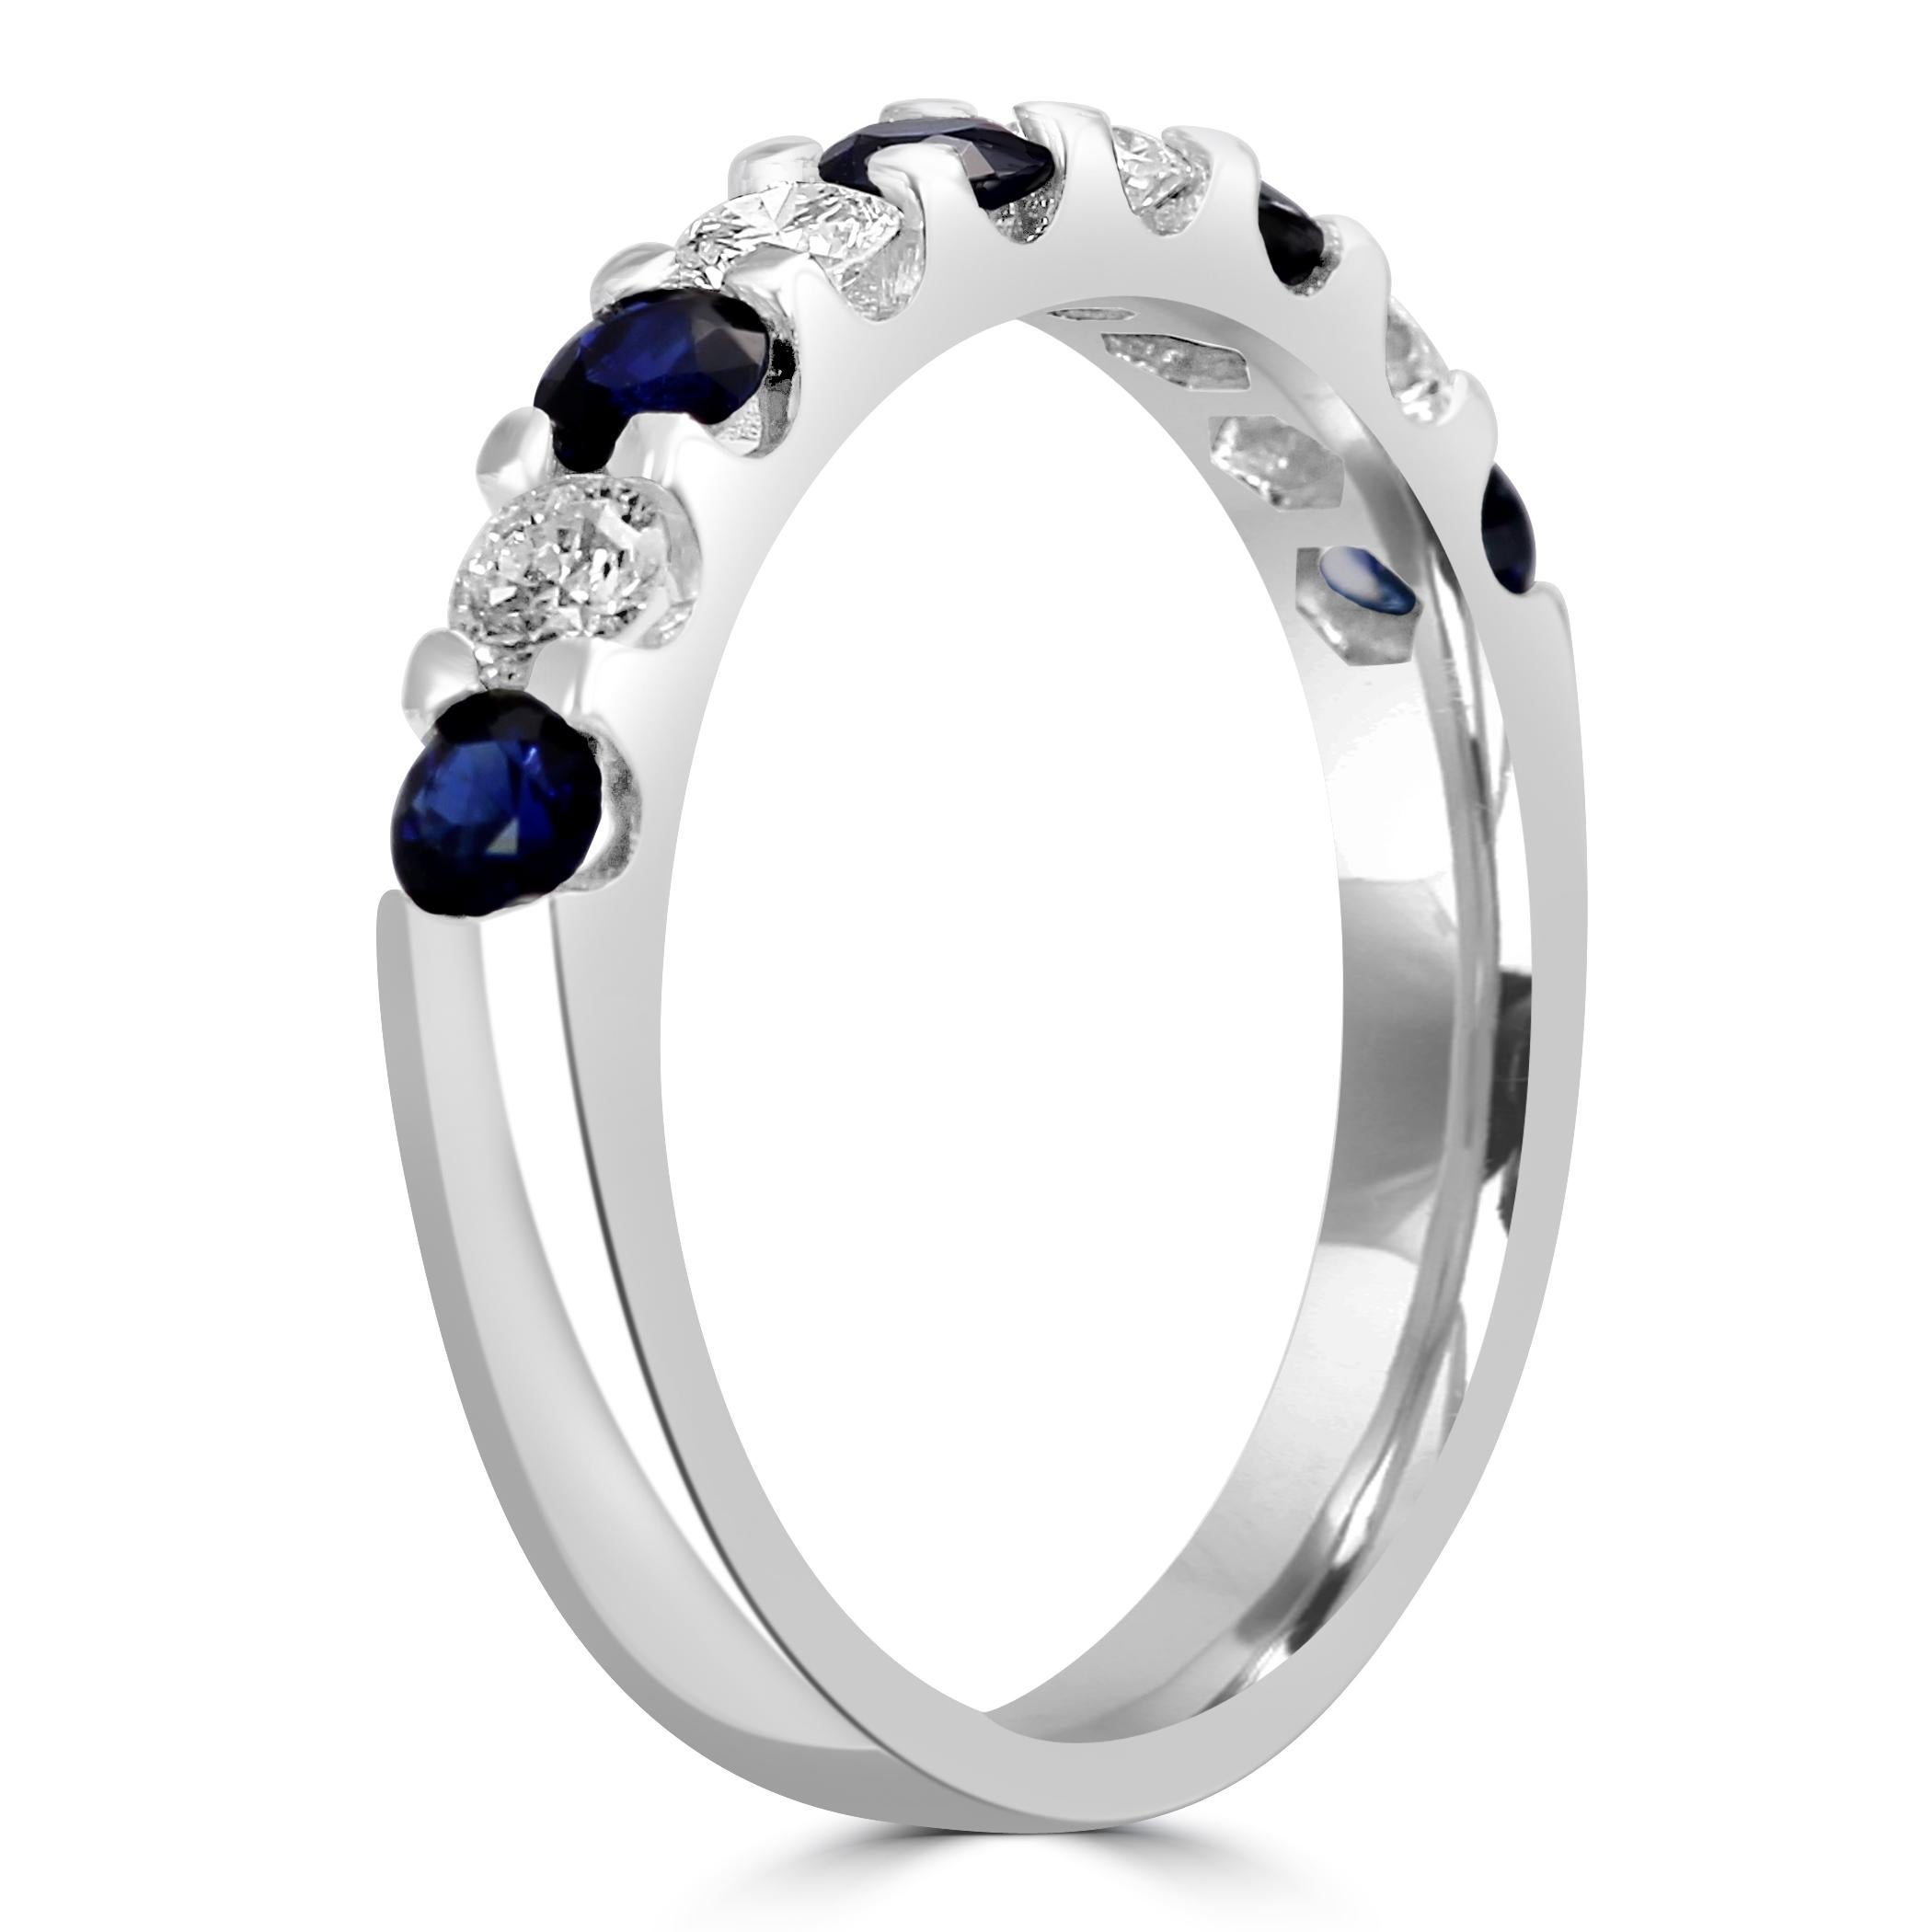 For Sale:  Blue Sapphire White Diamond Round 18K White Gold Fashion Engagement Band Ring 5